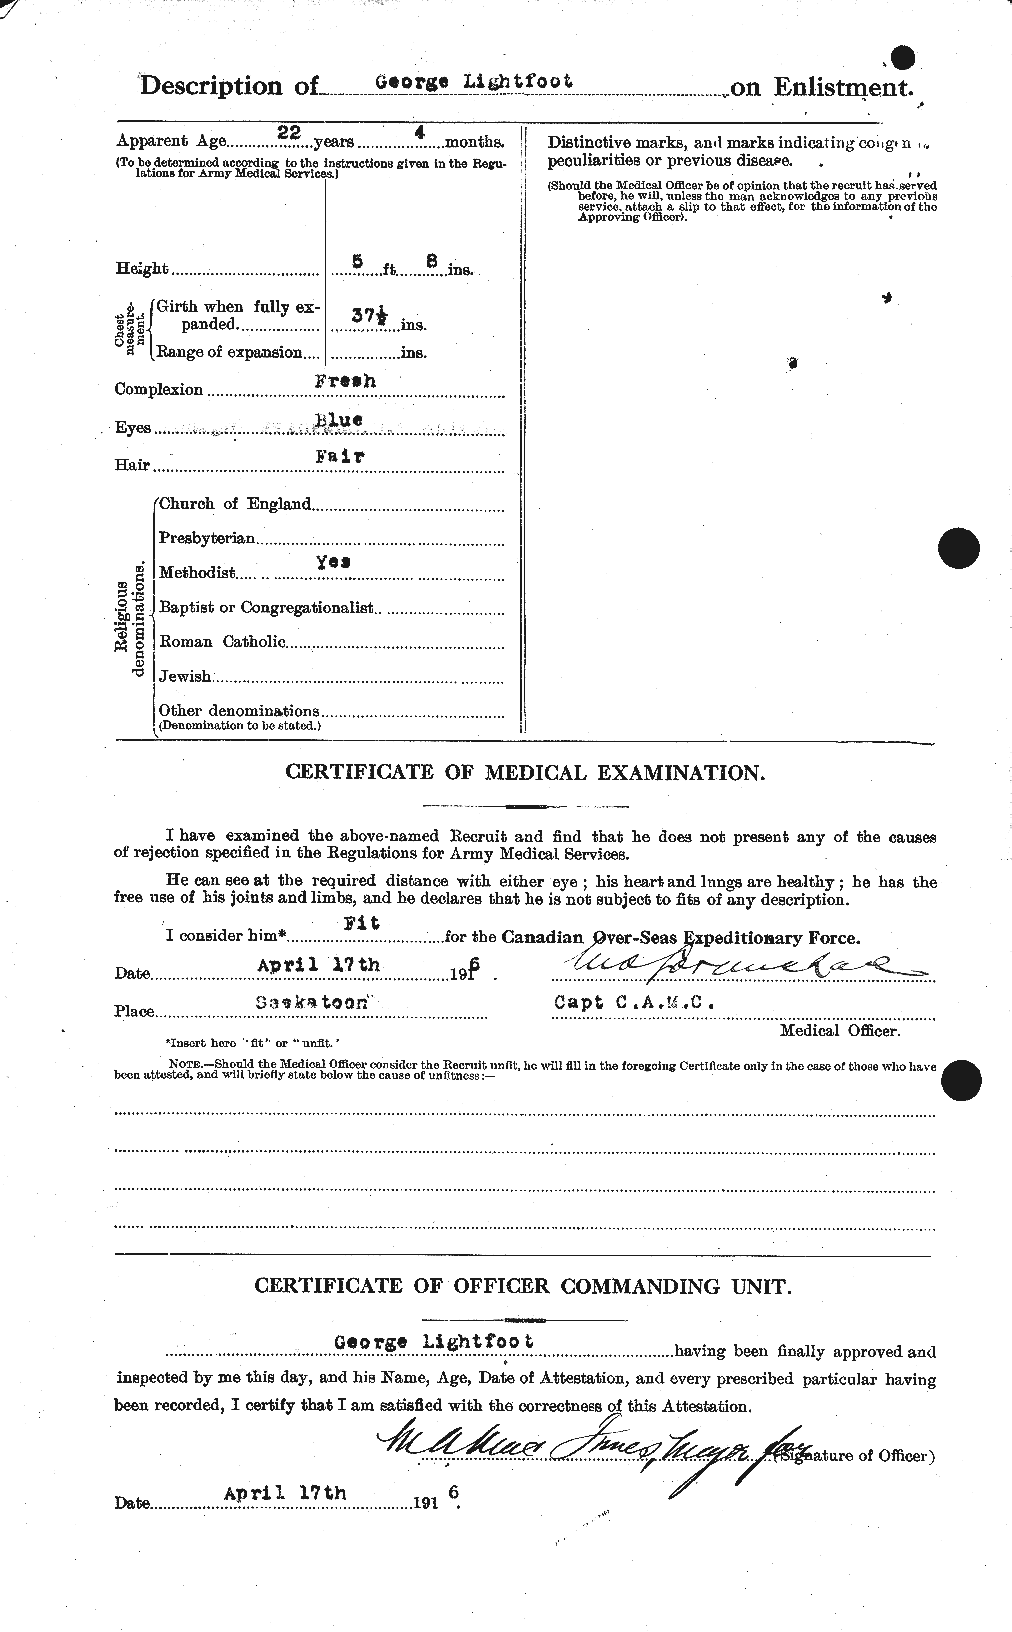 Personnel Records of the First World War - CEF 465525b